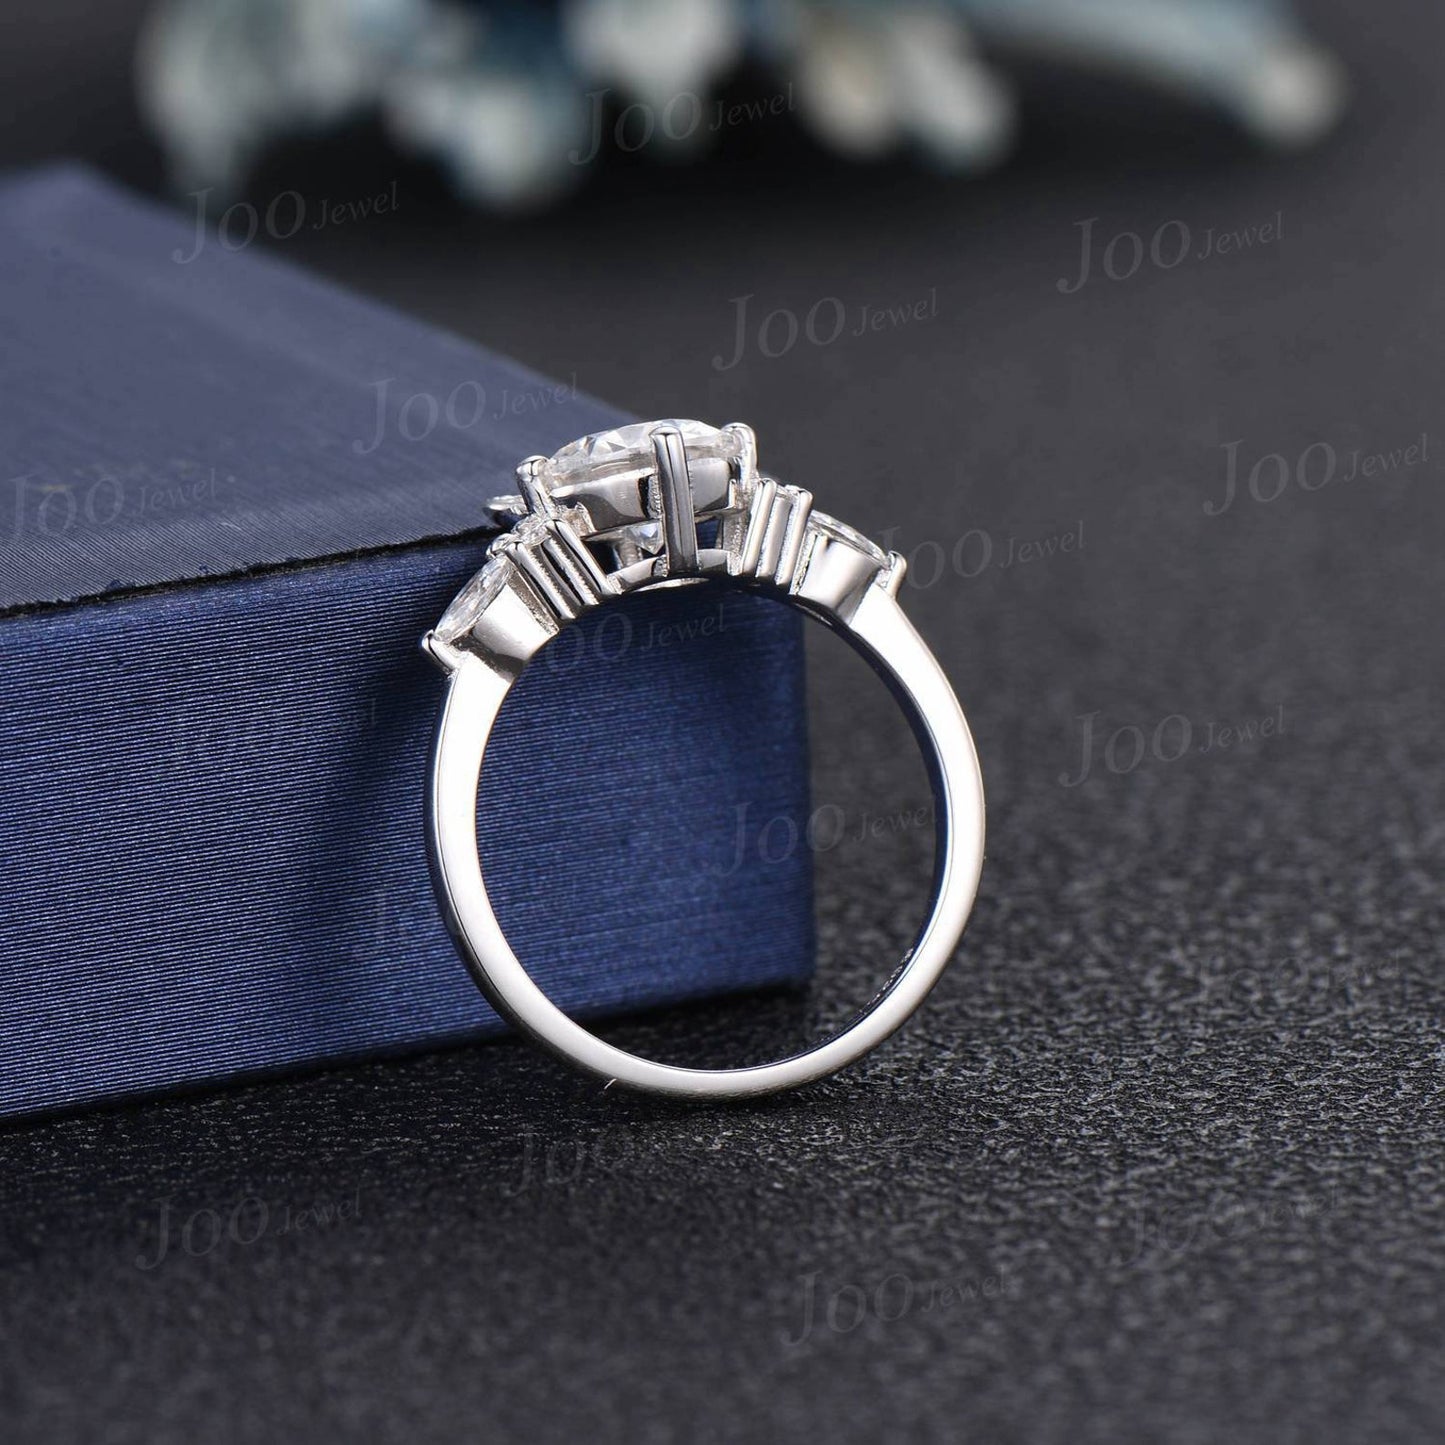 Kitten Cat Engagement Ring Vintage 1.2ct Round Natural Aquamarine Blue Sapphire Ring Peekaboo Cat Promise Wedding Ring Gifts for Cat Lover